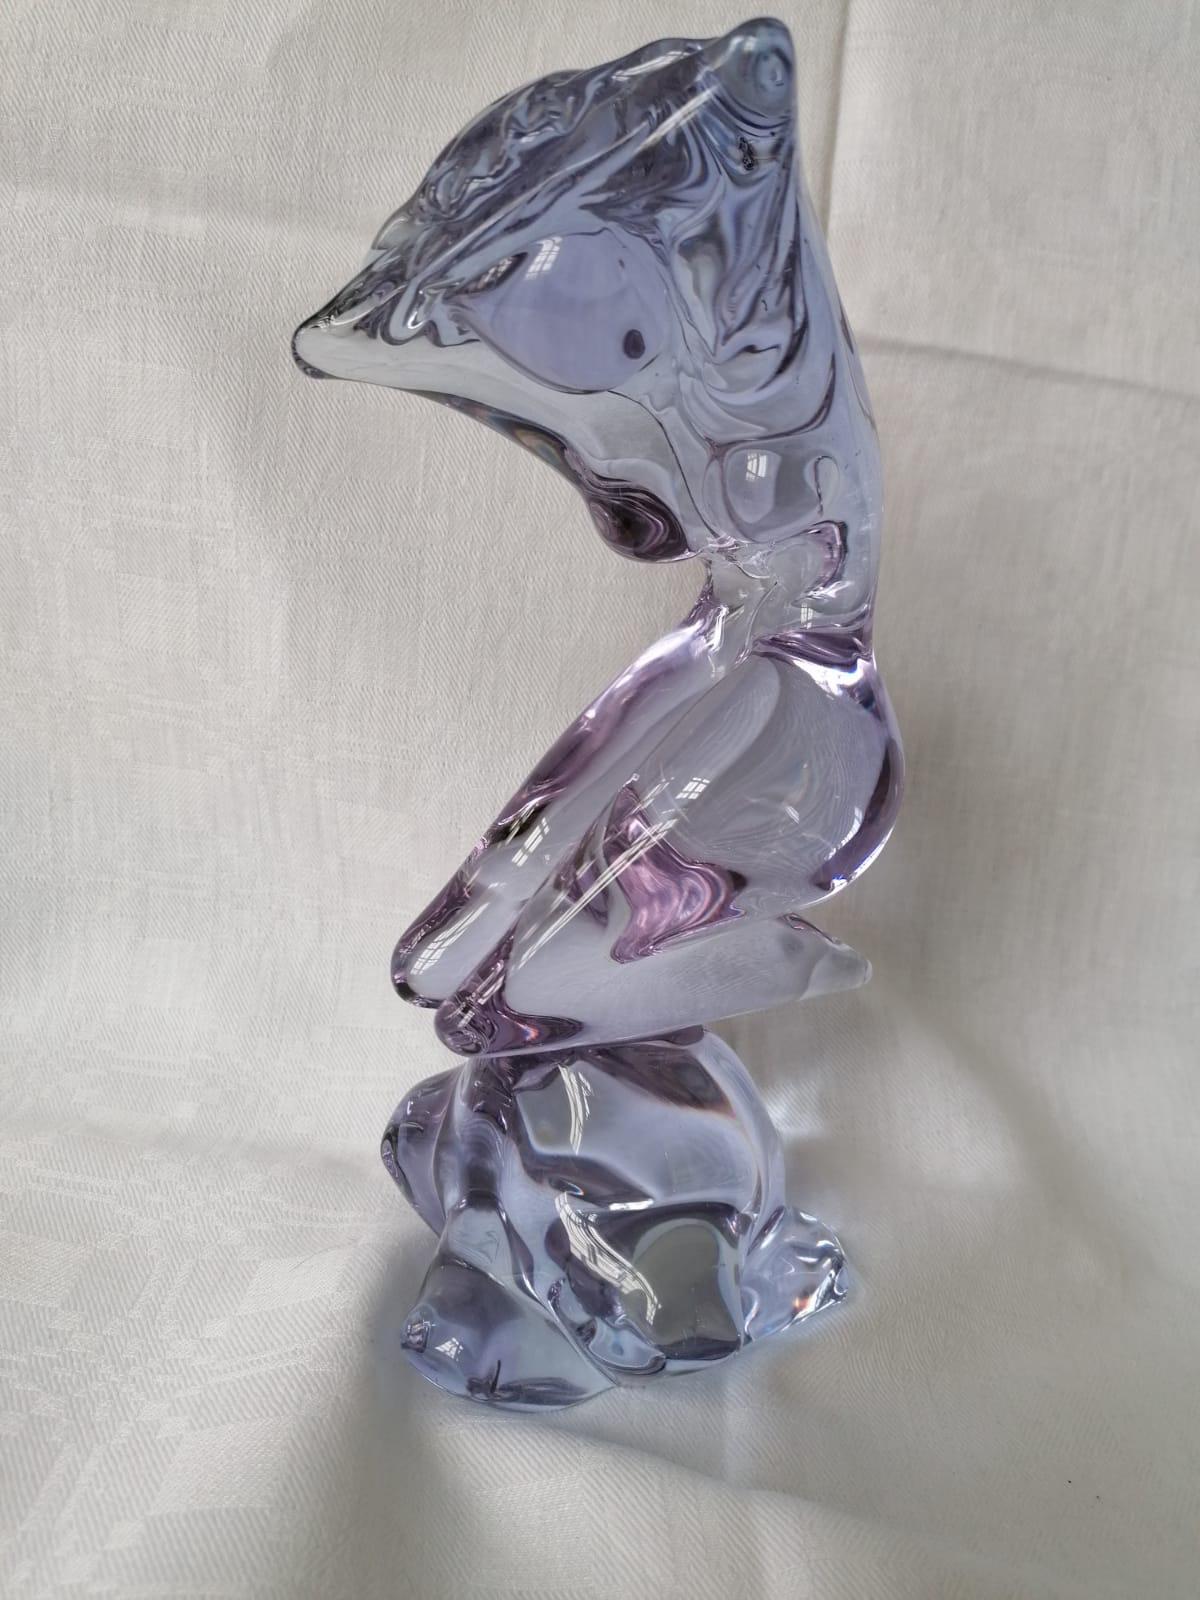 Mid-Century Modern Violet Murano Glass Sculpture For Sale